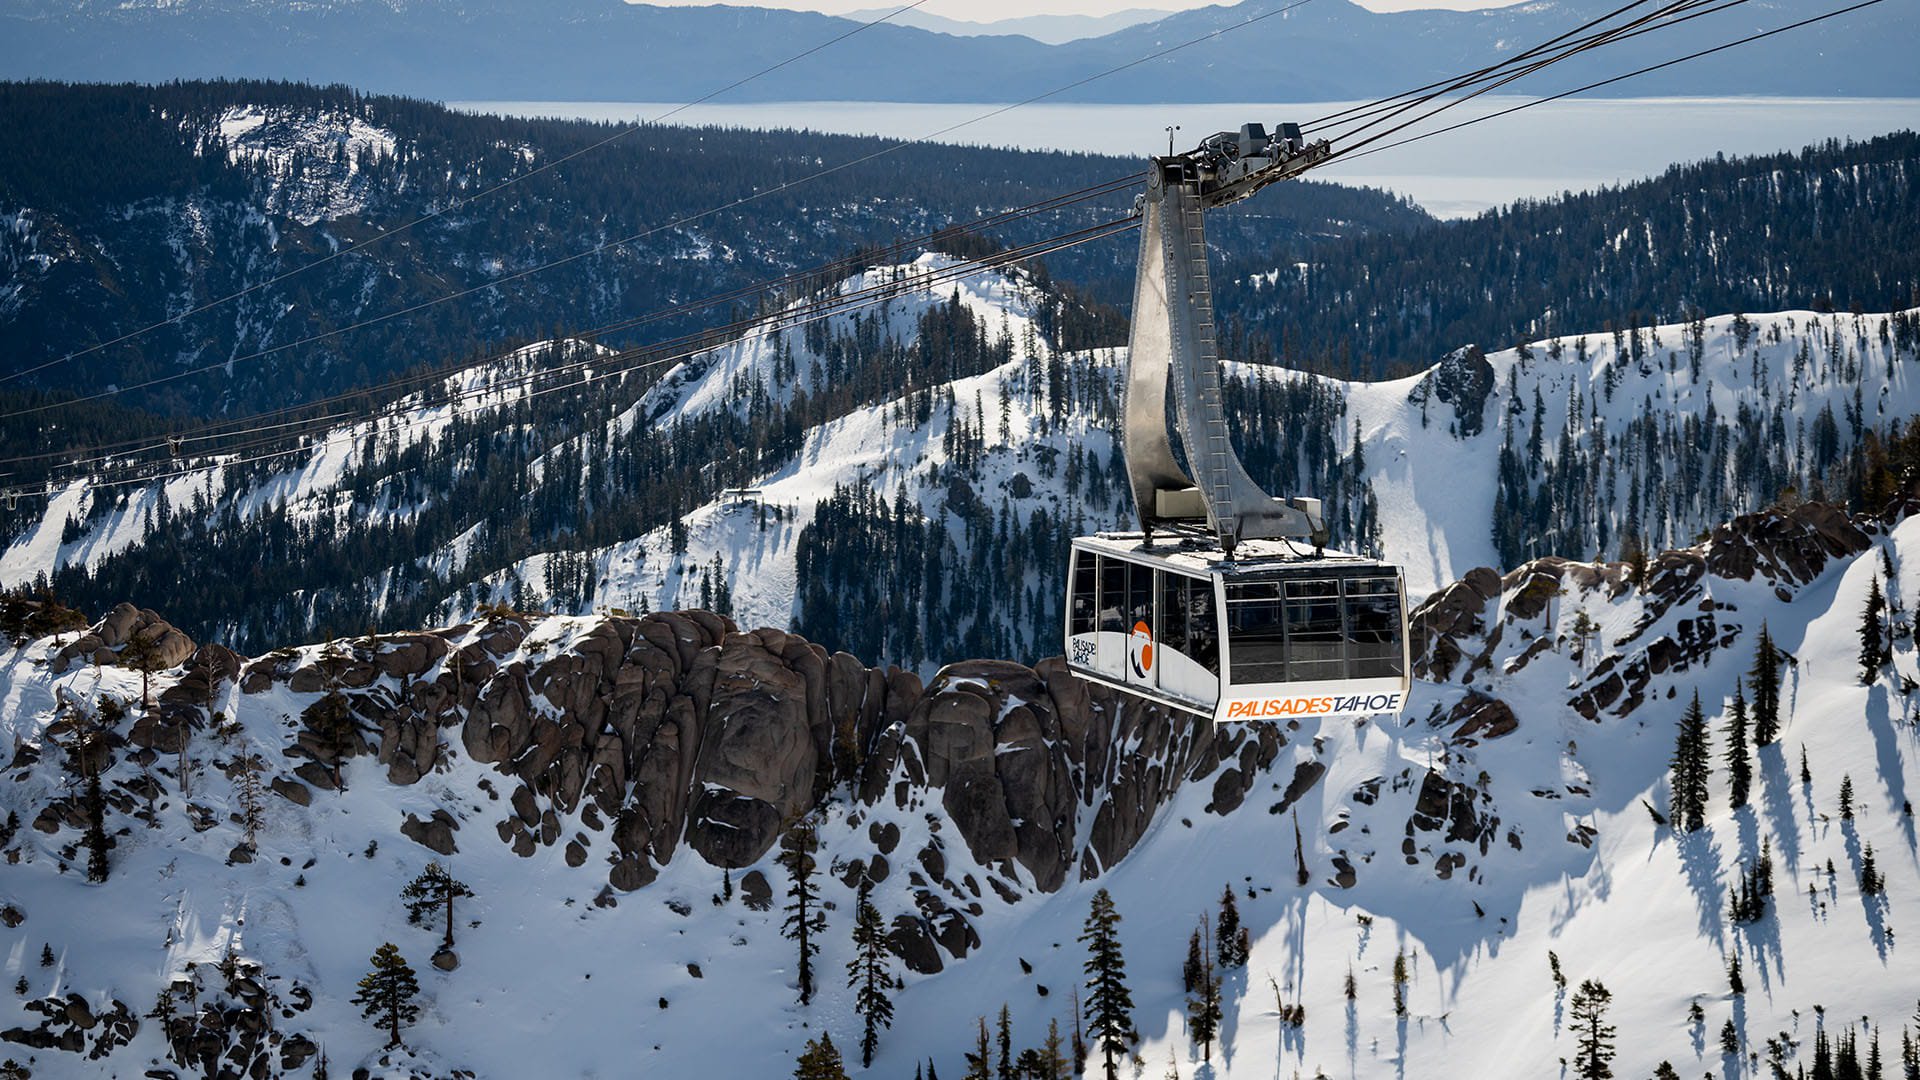 The Palisades Tahoe Aerial Tram docks at High Camp on a snowy winter day.